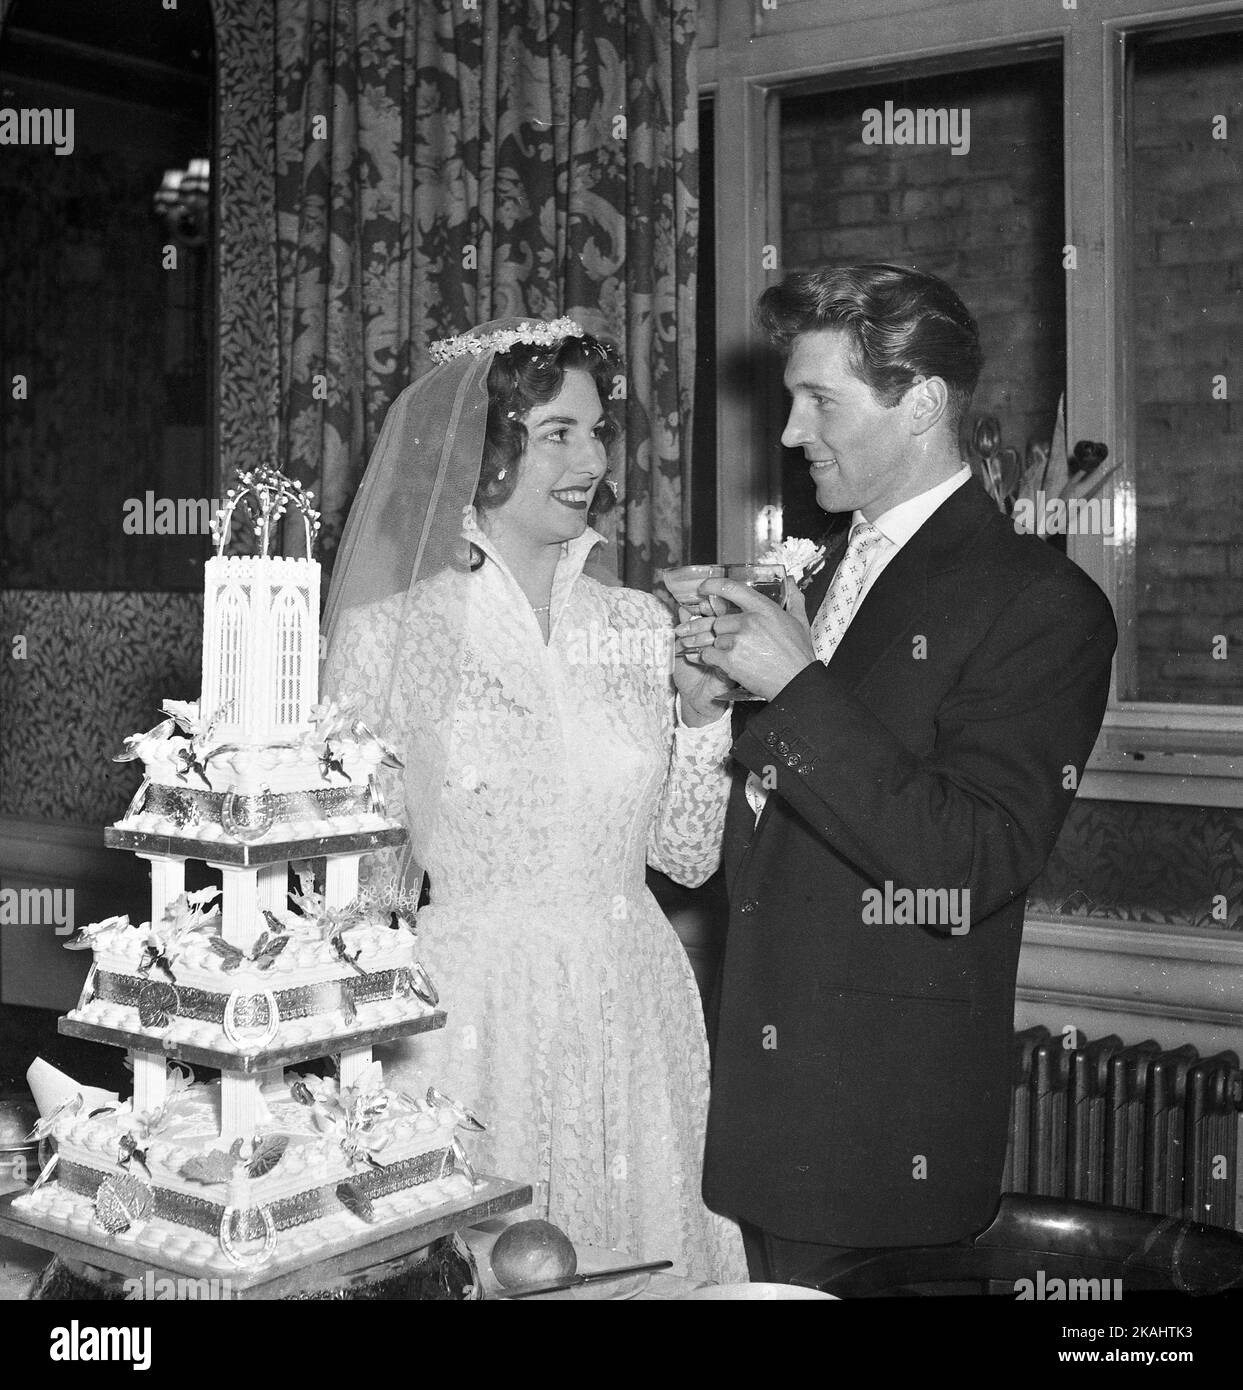 Wedding Day of Mr & Mrs Francis of 23 Myrtle Road, London E17 c1952 A toast to the Bride and Groom by the spectacular wedding cake  Photo by Tony Henshaw Archive Stock Photo